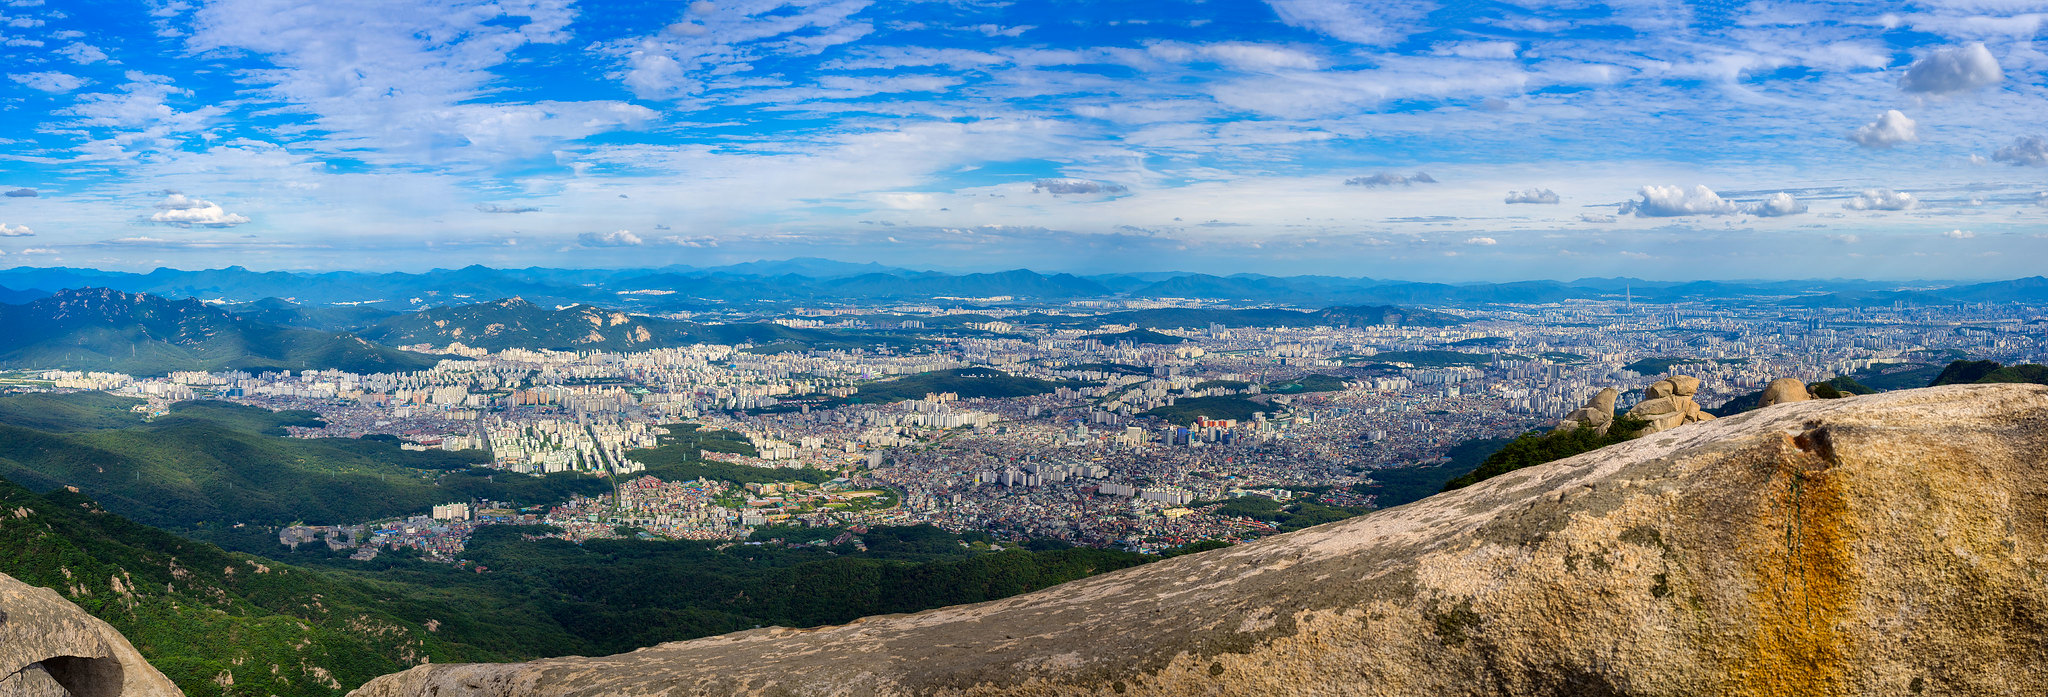 All of Seoul is visible on a clear fall day